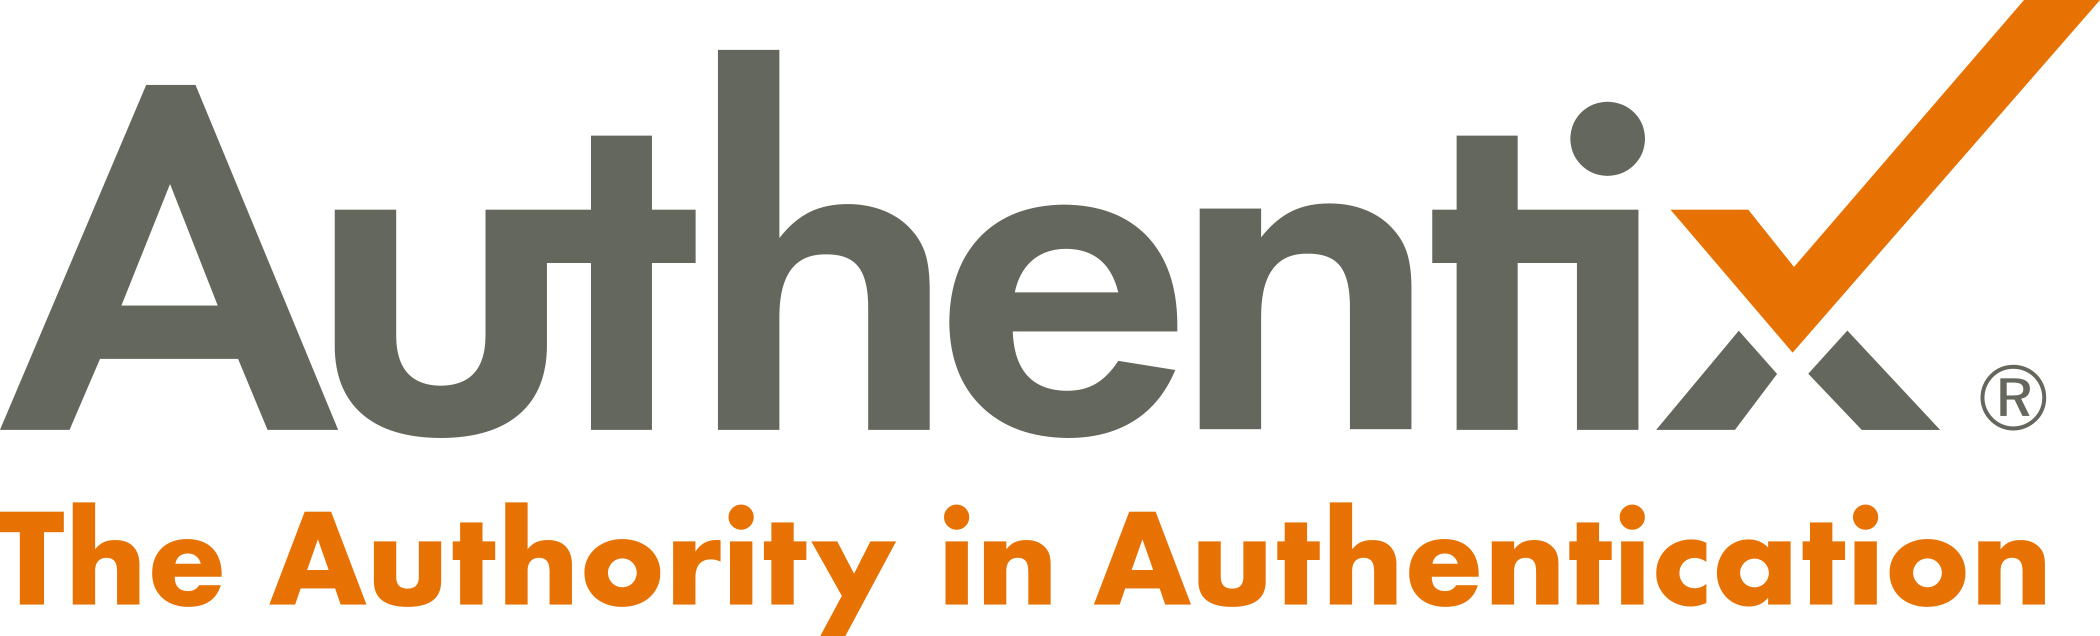 Authentix® Completes Asset Purchase Agreement for Acquisition of Nanotech Security Corp. Assets